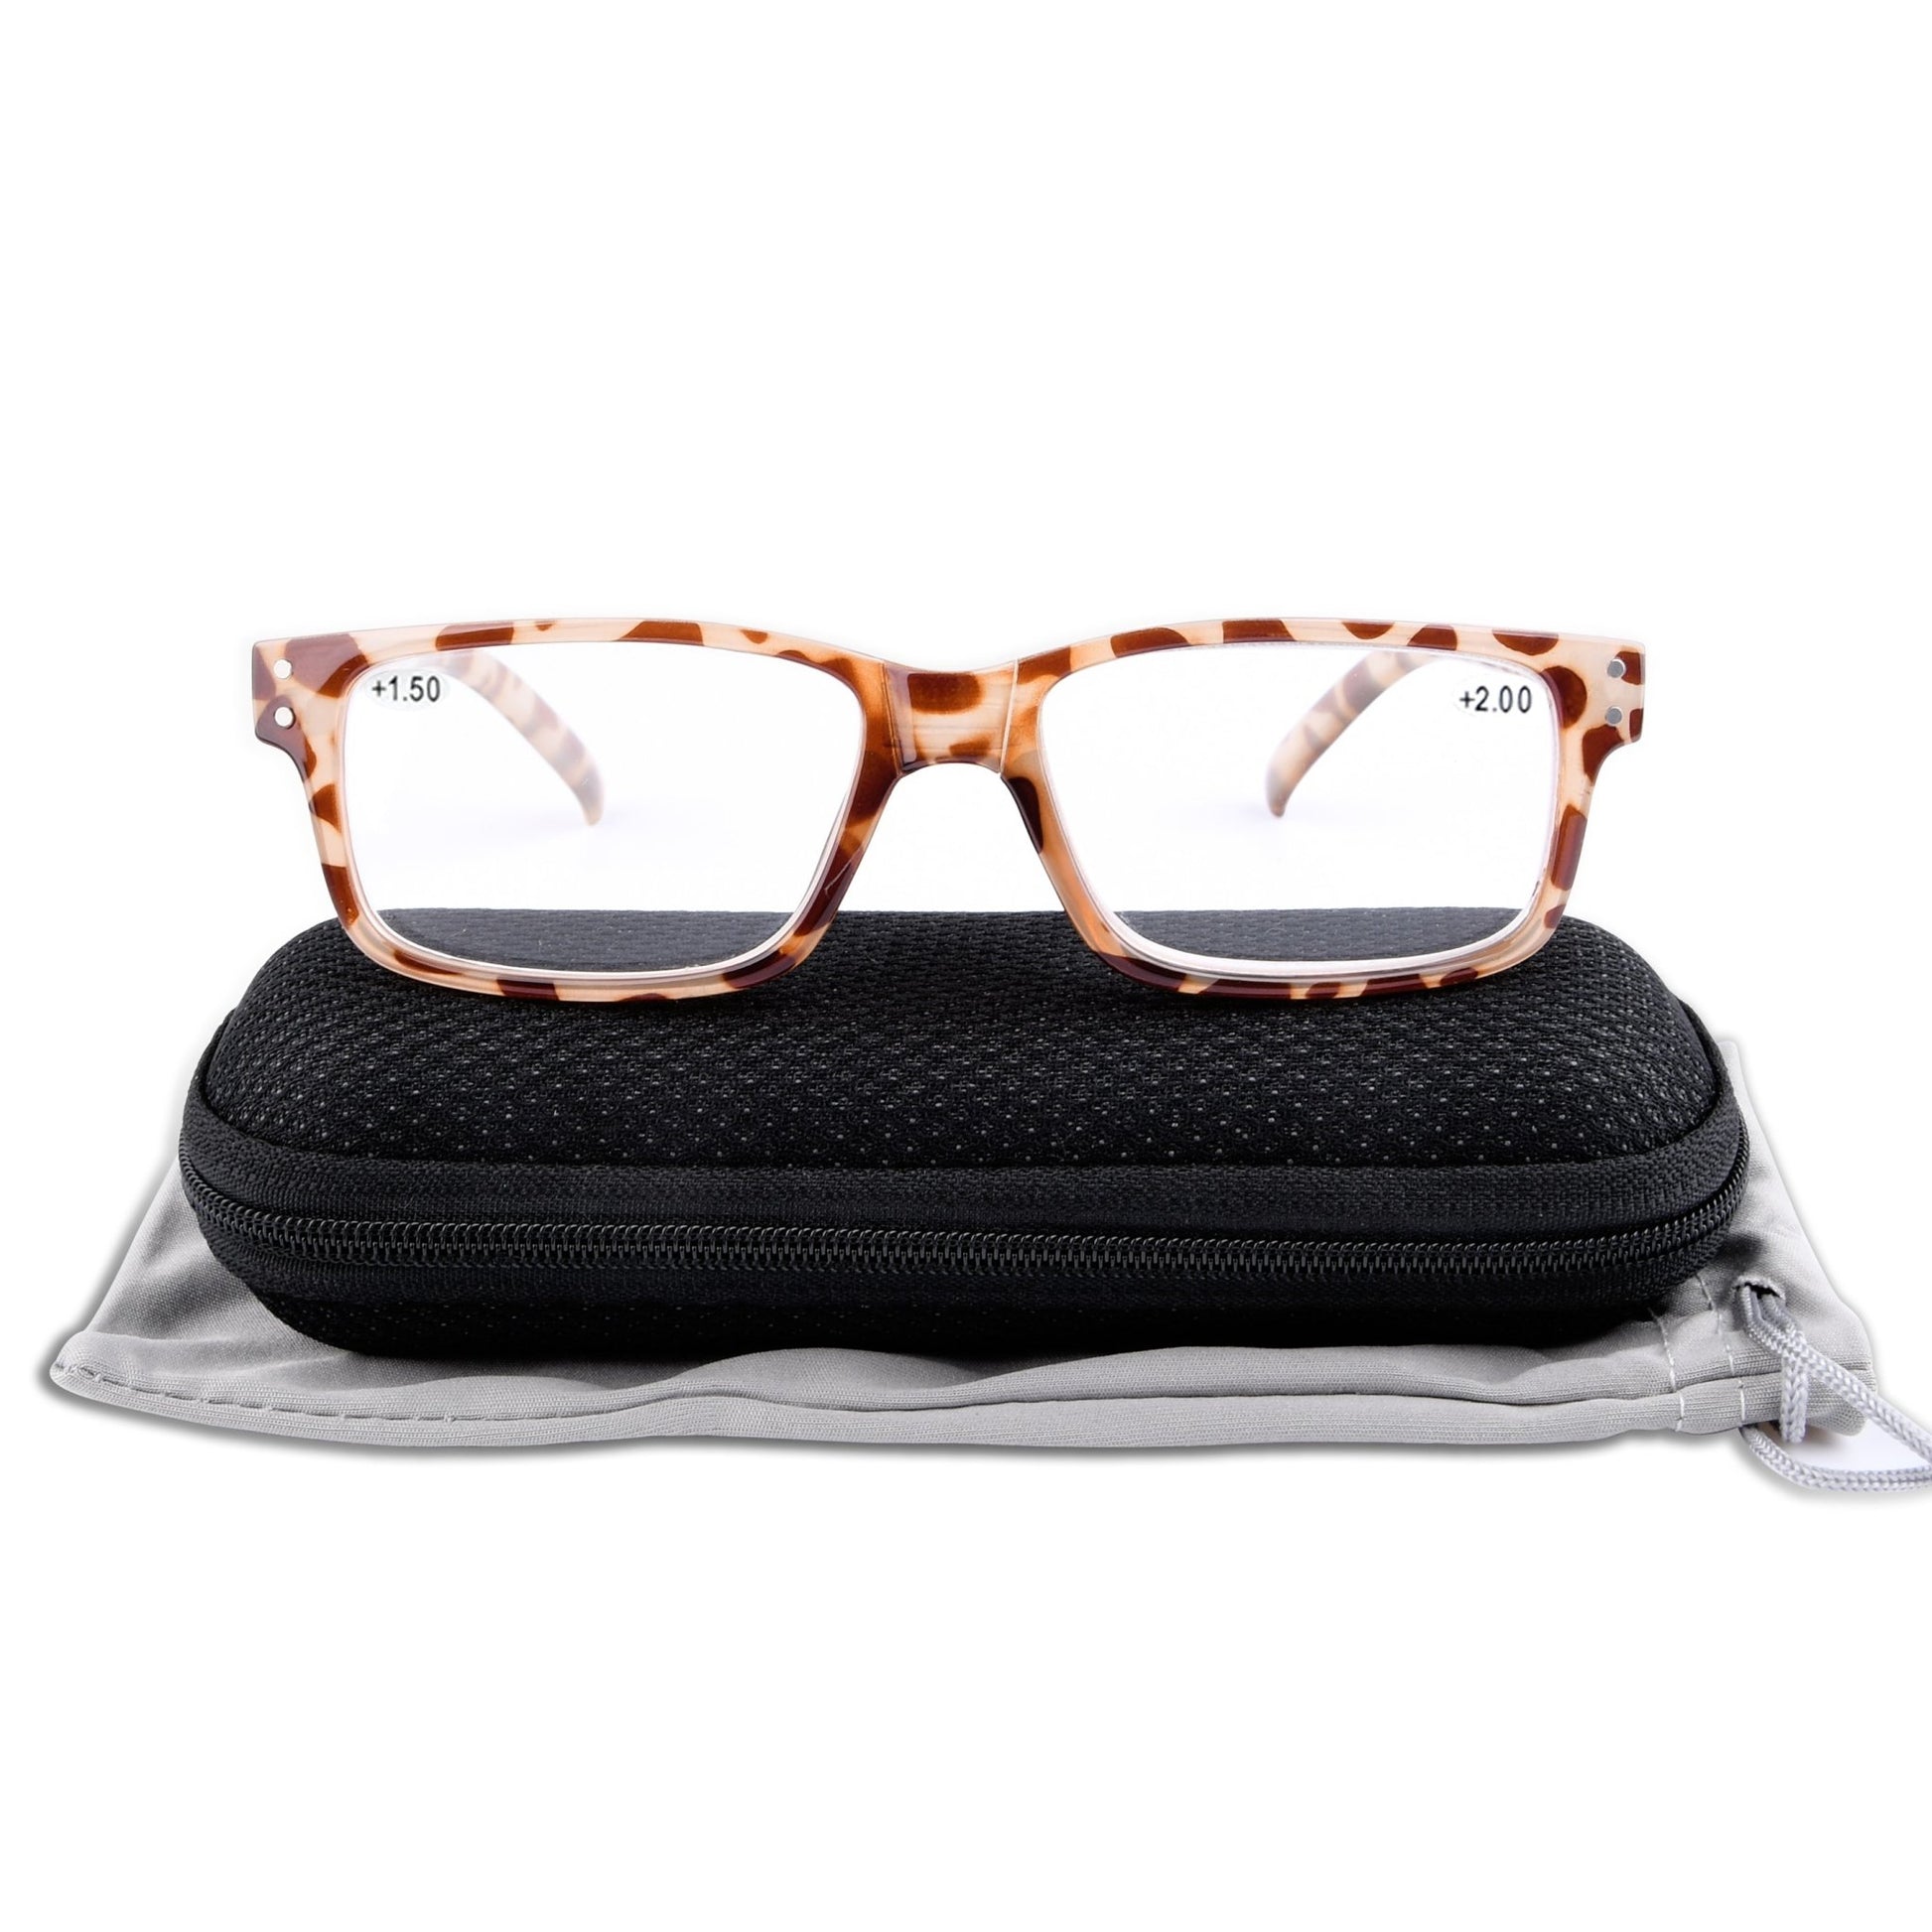 Reading Glasses with Different Strength for Each Eye PR032-DEMI